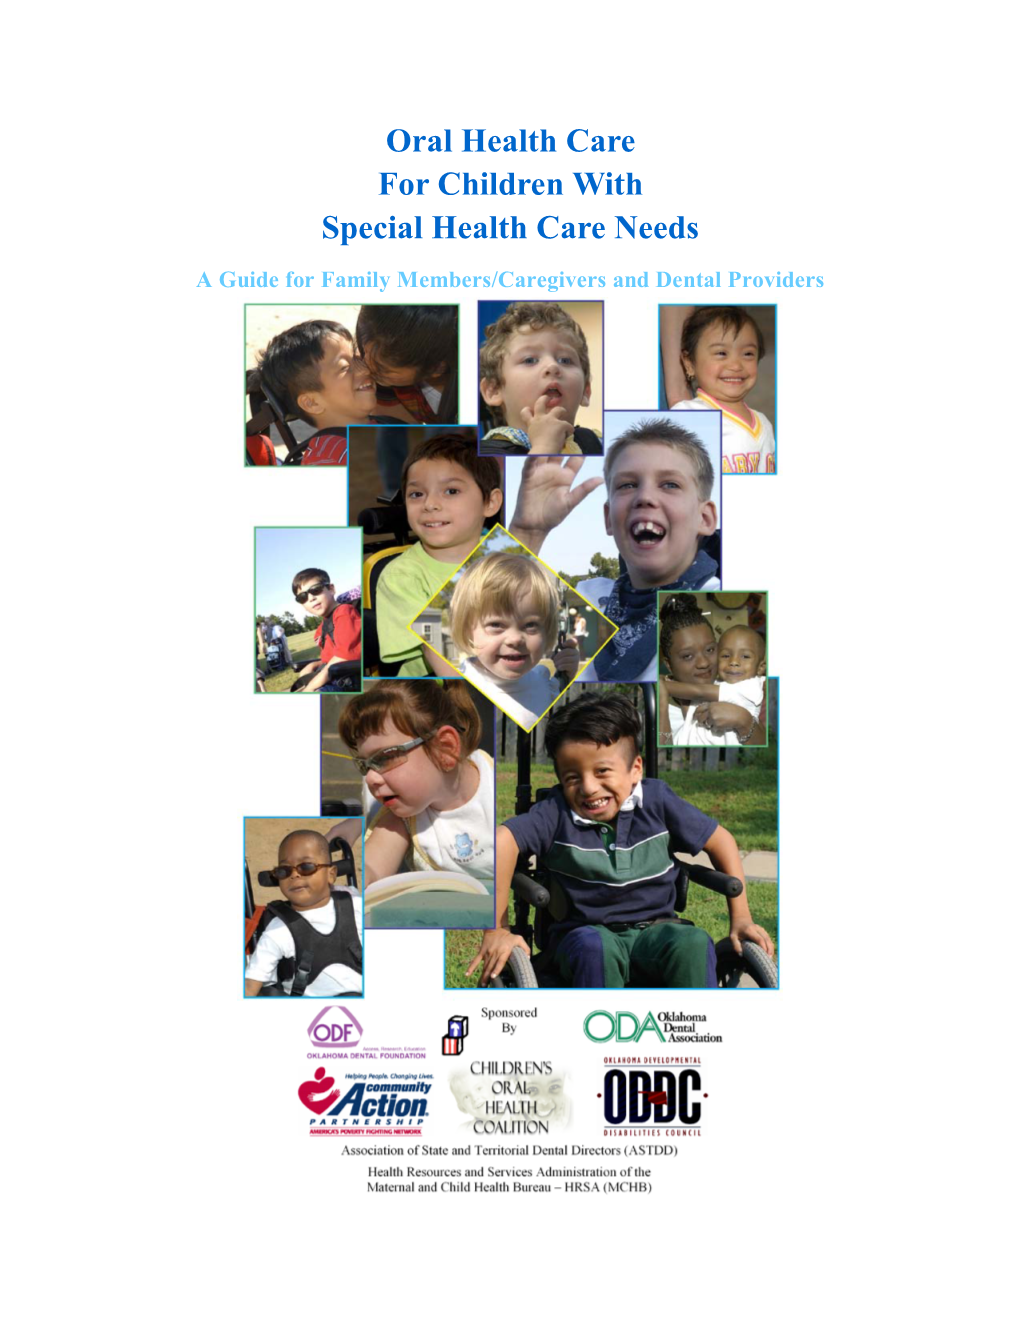 Oral Health Care for Children with Special Health Care Needs a Guide for Family Members/Caregivers and Dental Providers